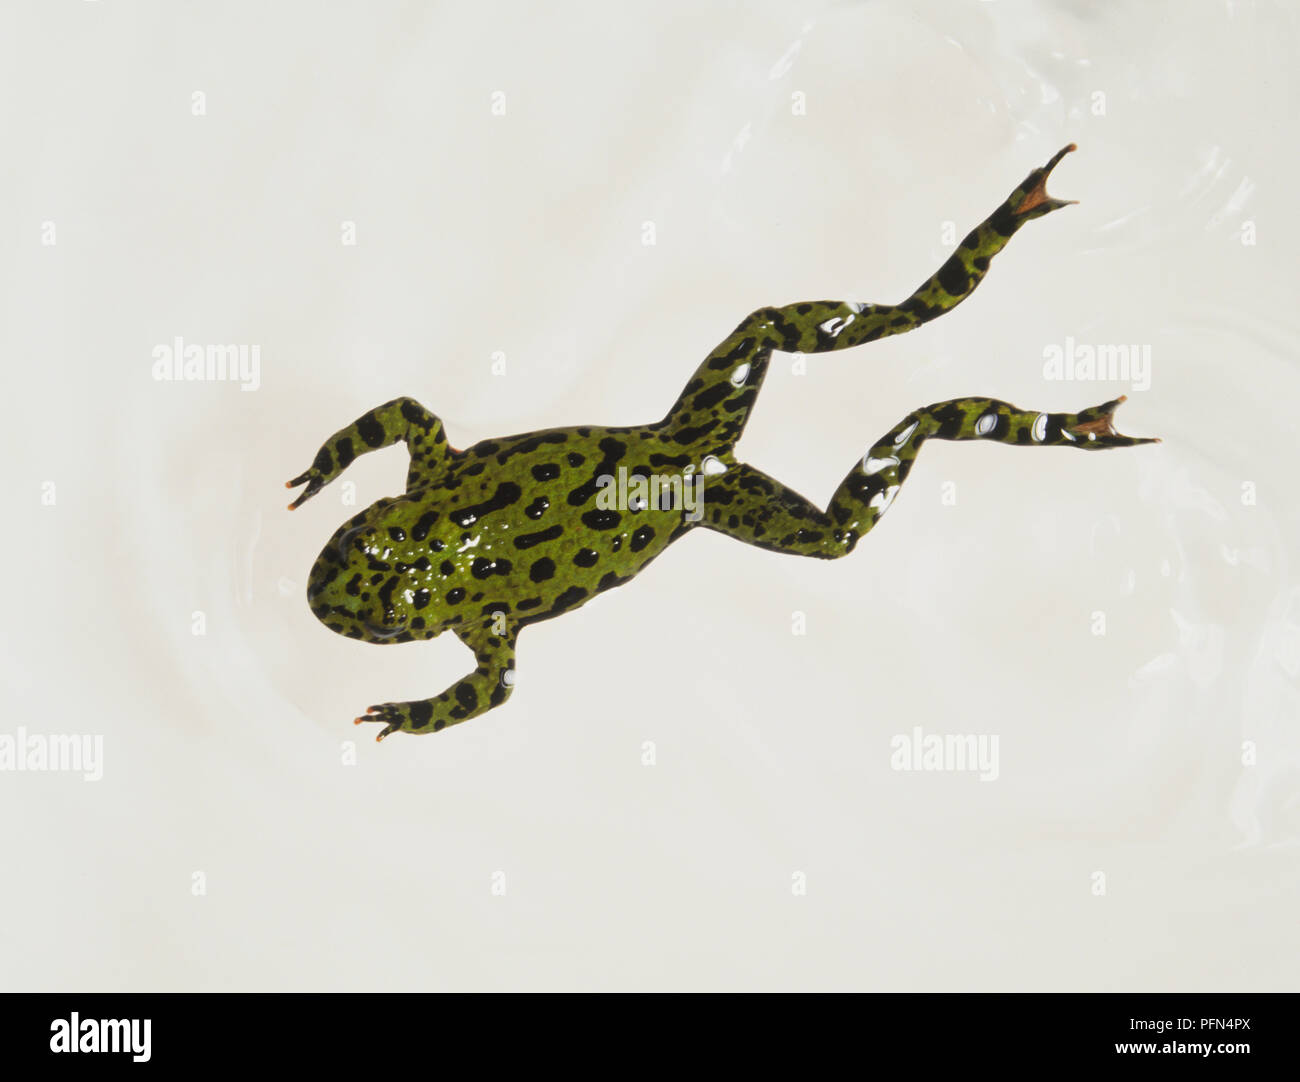 Oriental Fire-bellied Toad (Bombina orientalis), view from above. Stock Photo